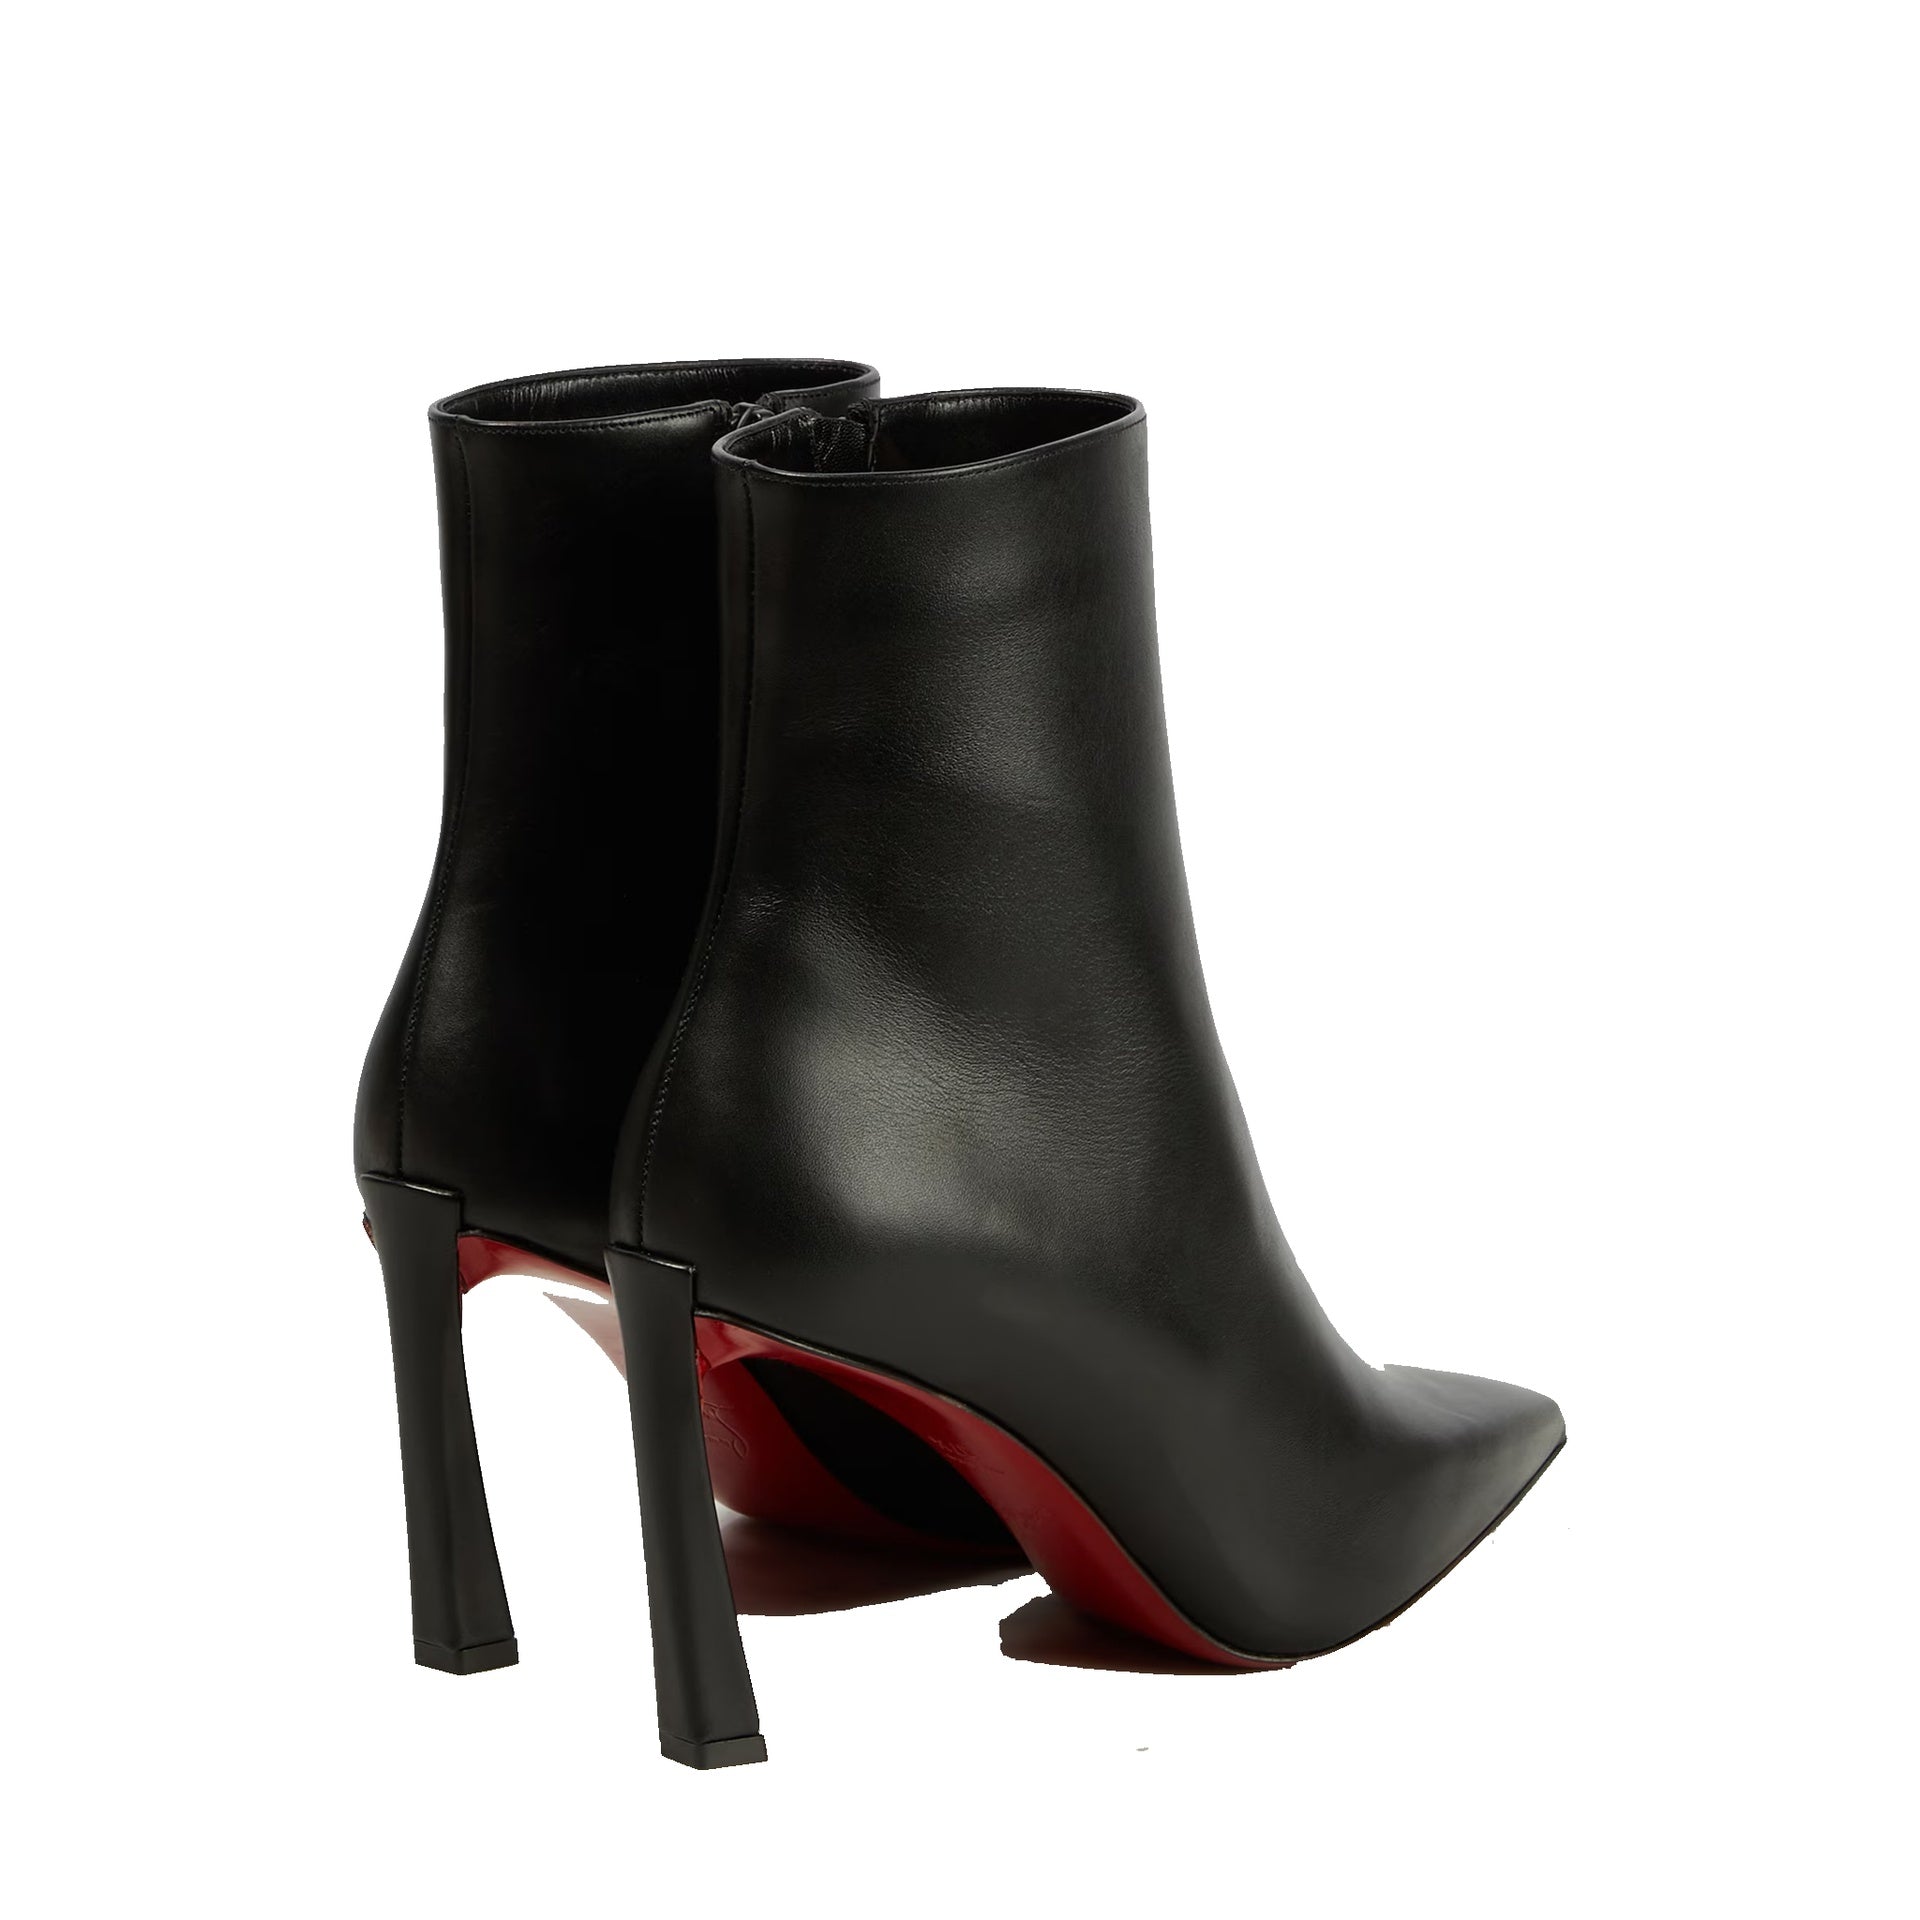 CHRISTIAN-LOUBOUTIN-OUTLET-SALE-Christian-Louboutin-Cora-85-Boots-Stiefel-Stiefeletten-BLACK-36_5-ARCHIVE-COLLECTION-3.jpg